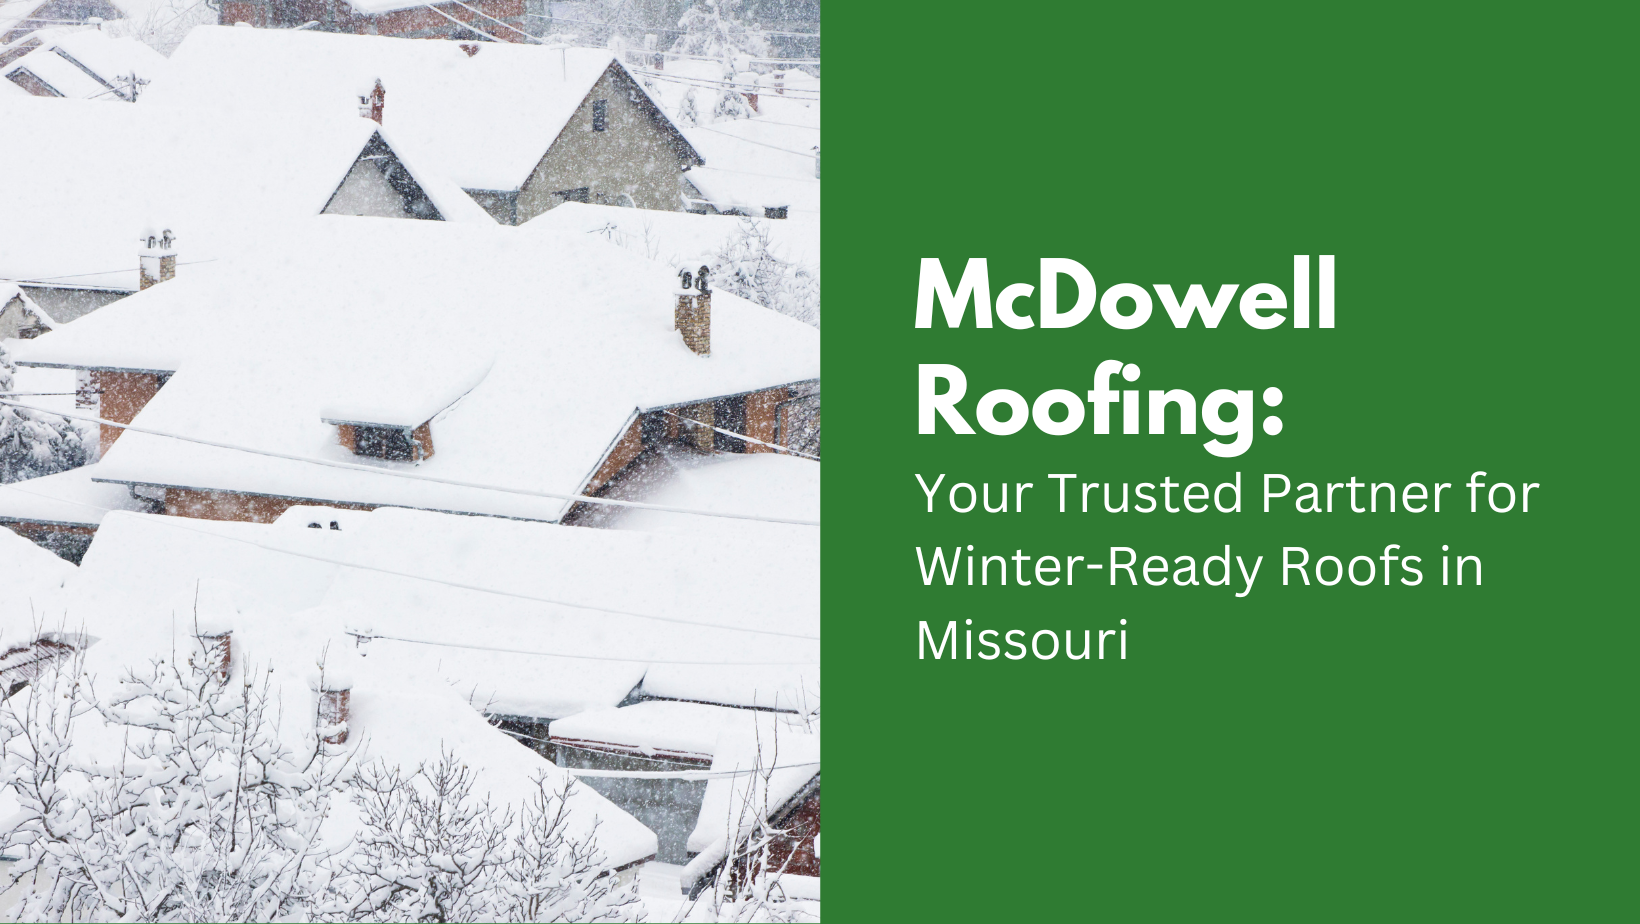 McDowell Roofing: Your Trusted Partner for Winter-Ready Roofs in Missouri